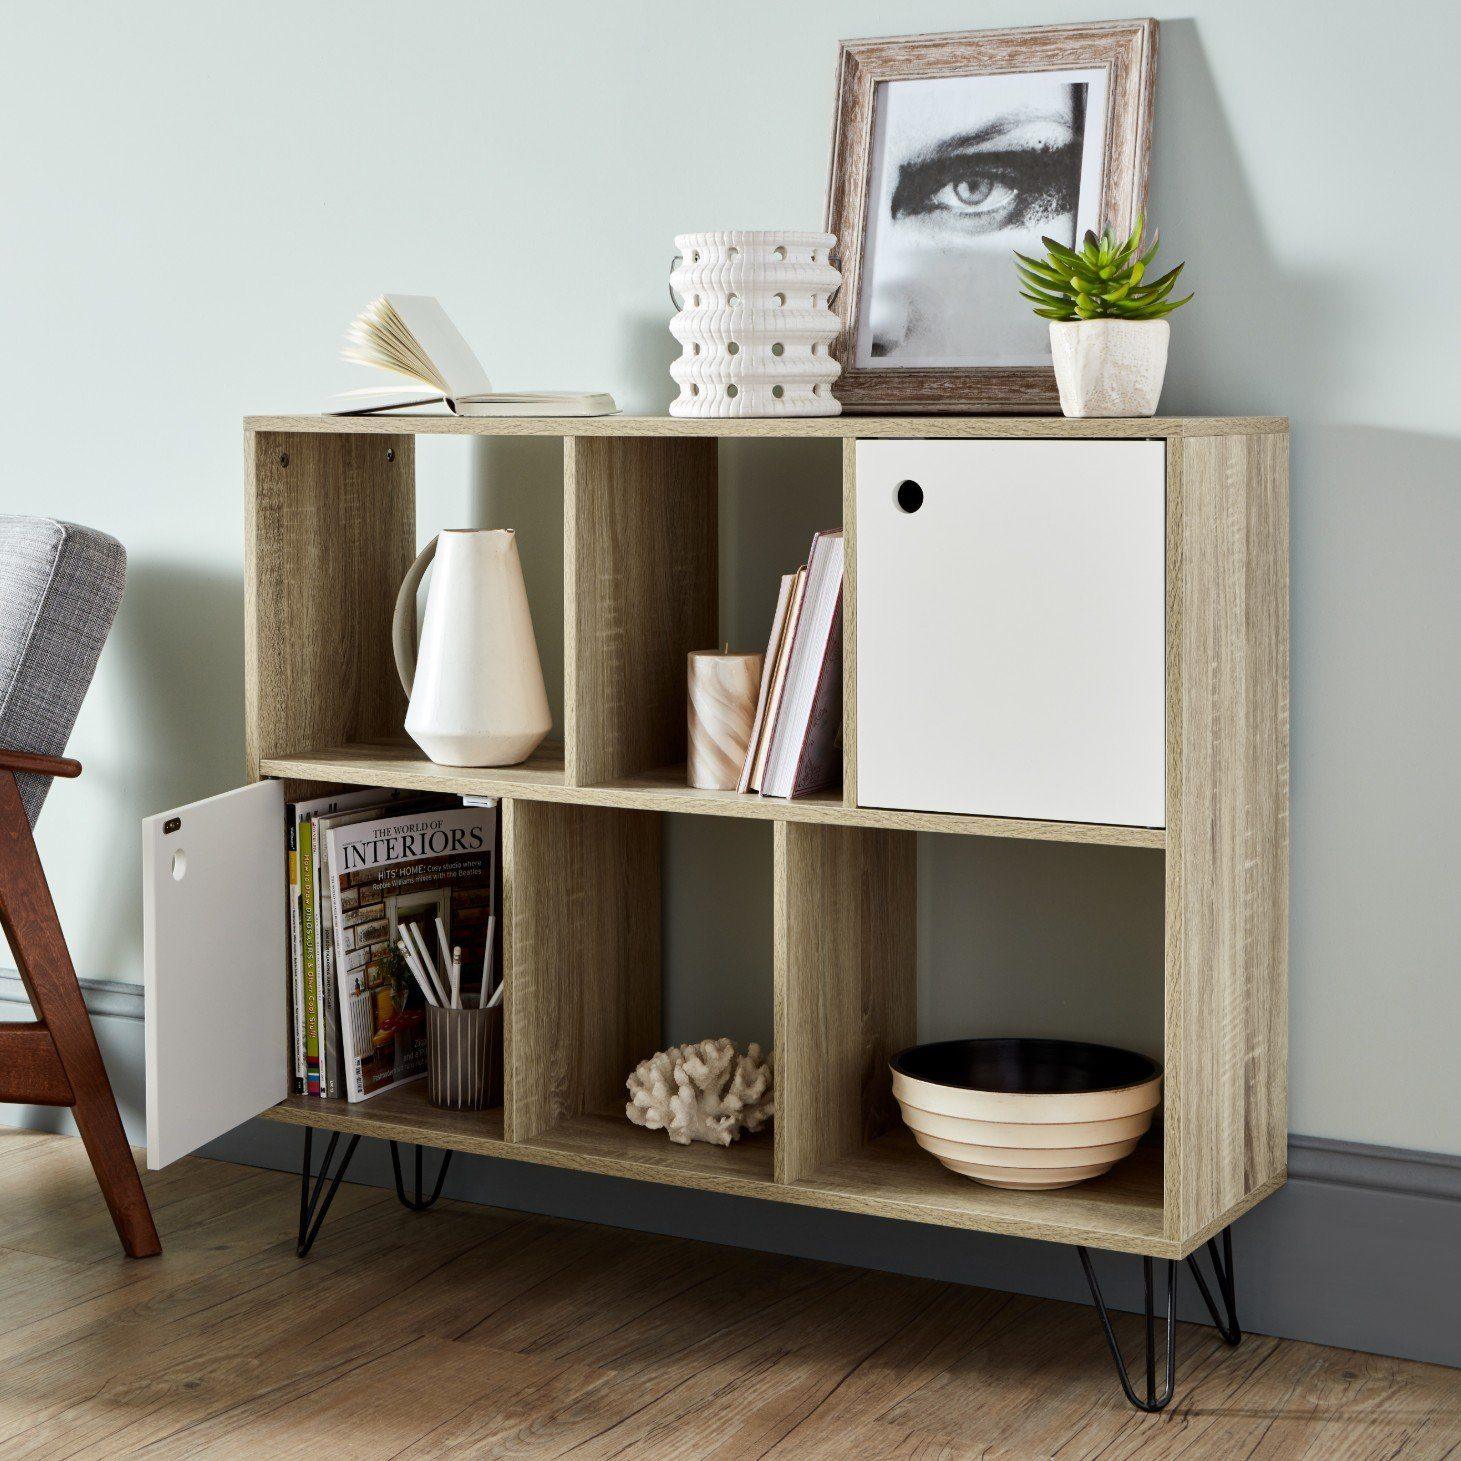 Anderson cube storage unit - Oak effect with white cupboards 